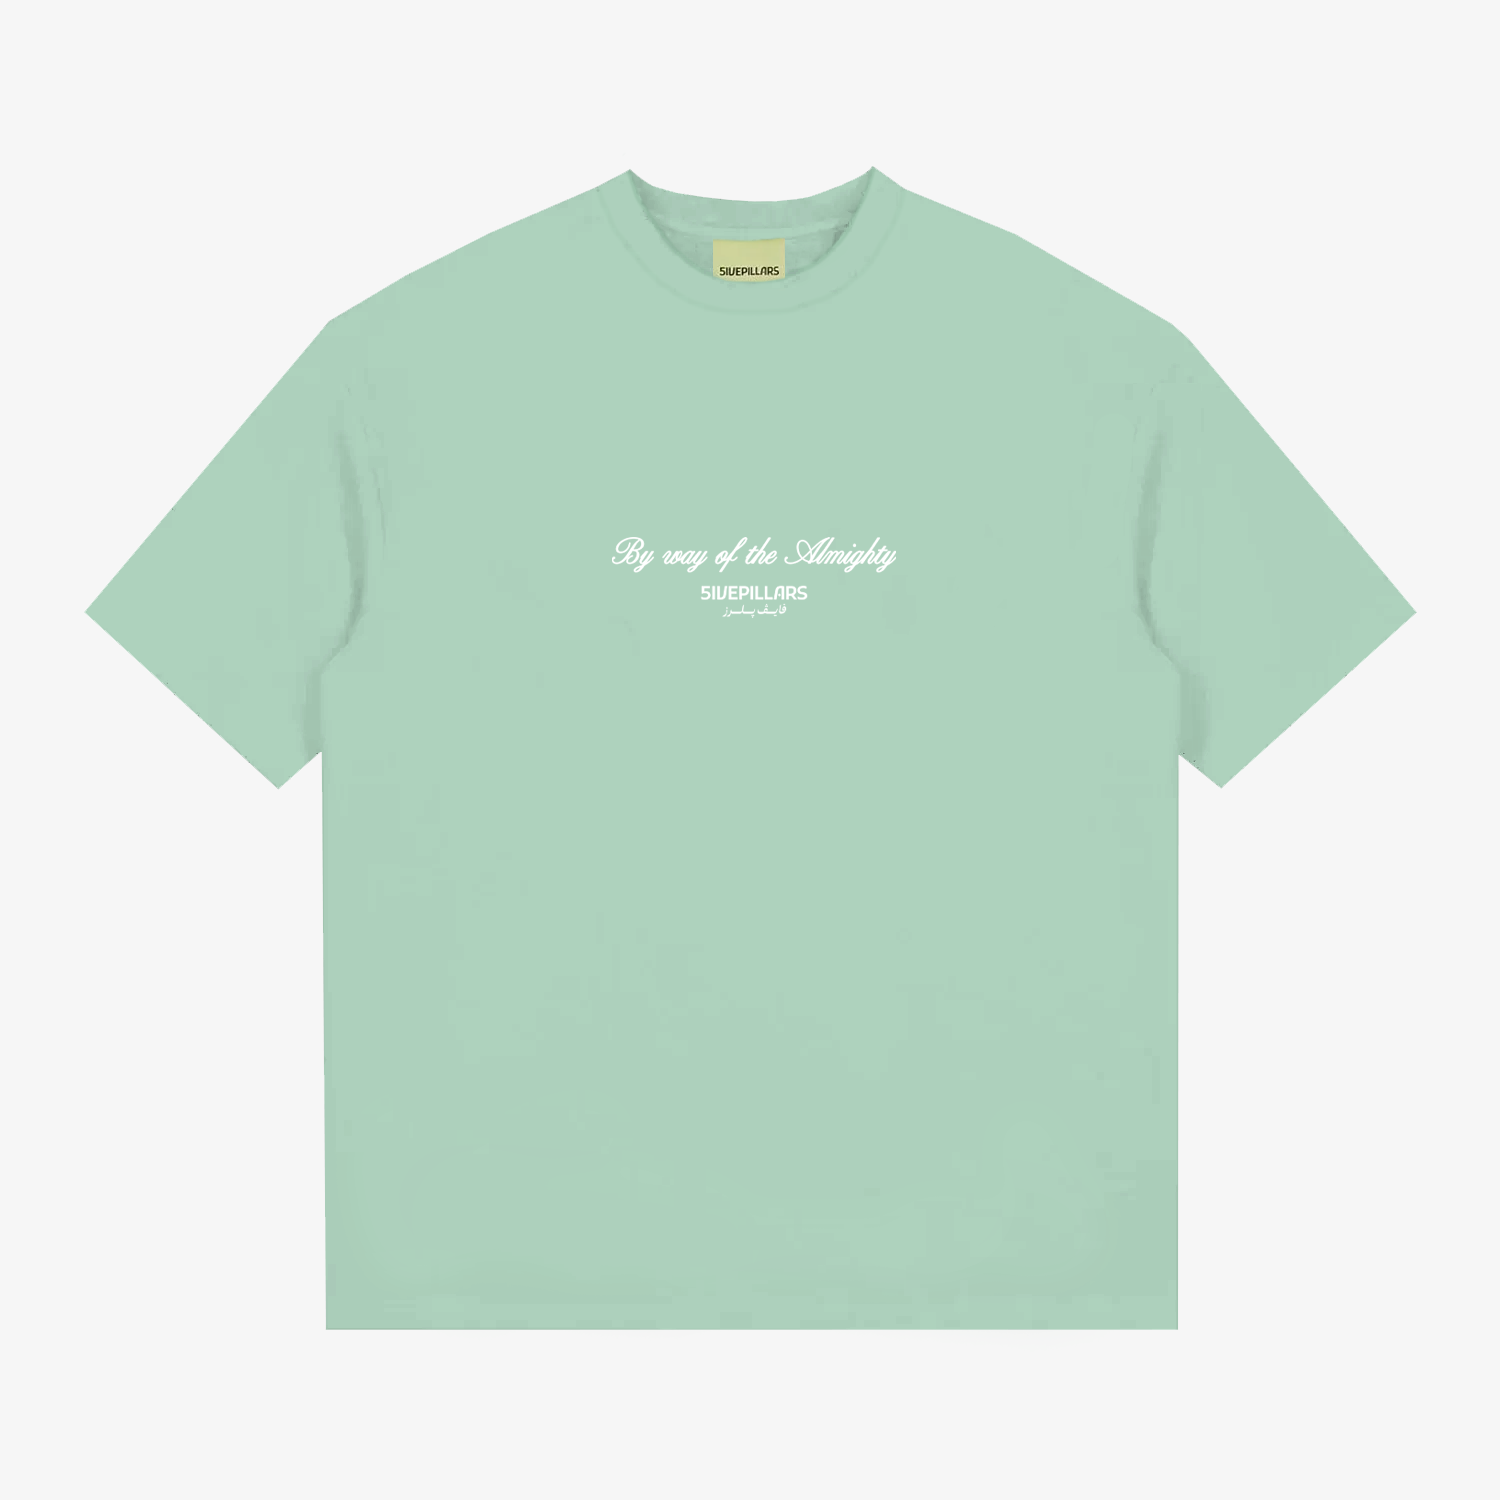 By Way of The Almighty Tee - Seafoam Green